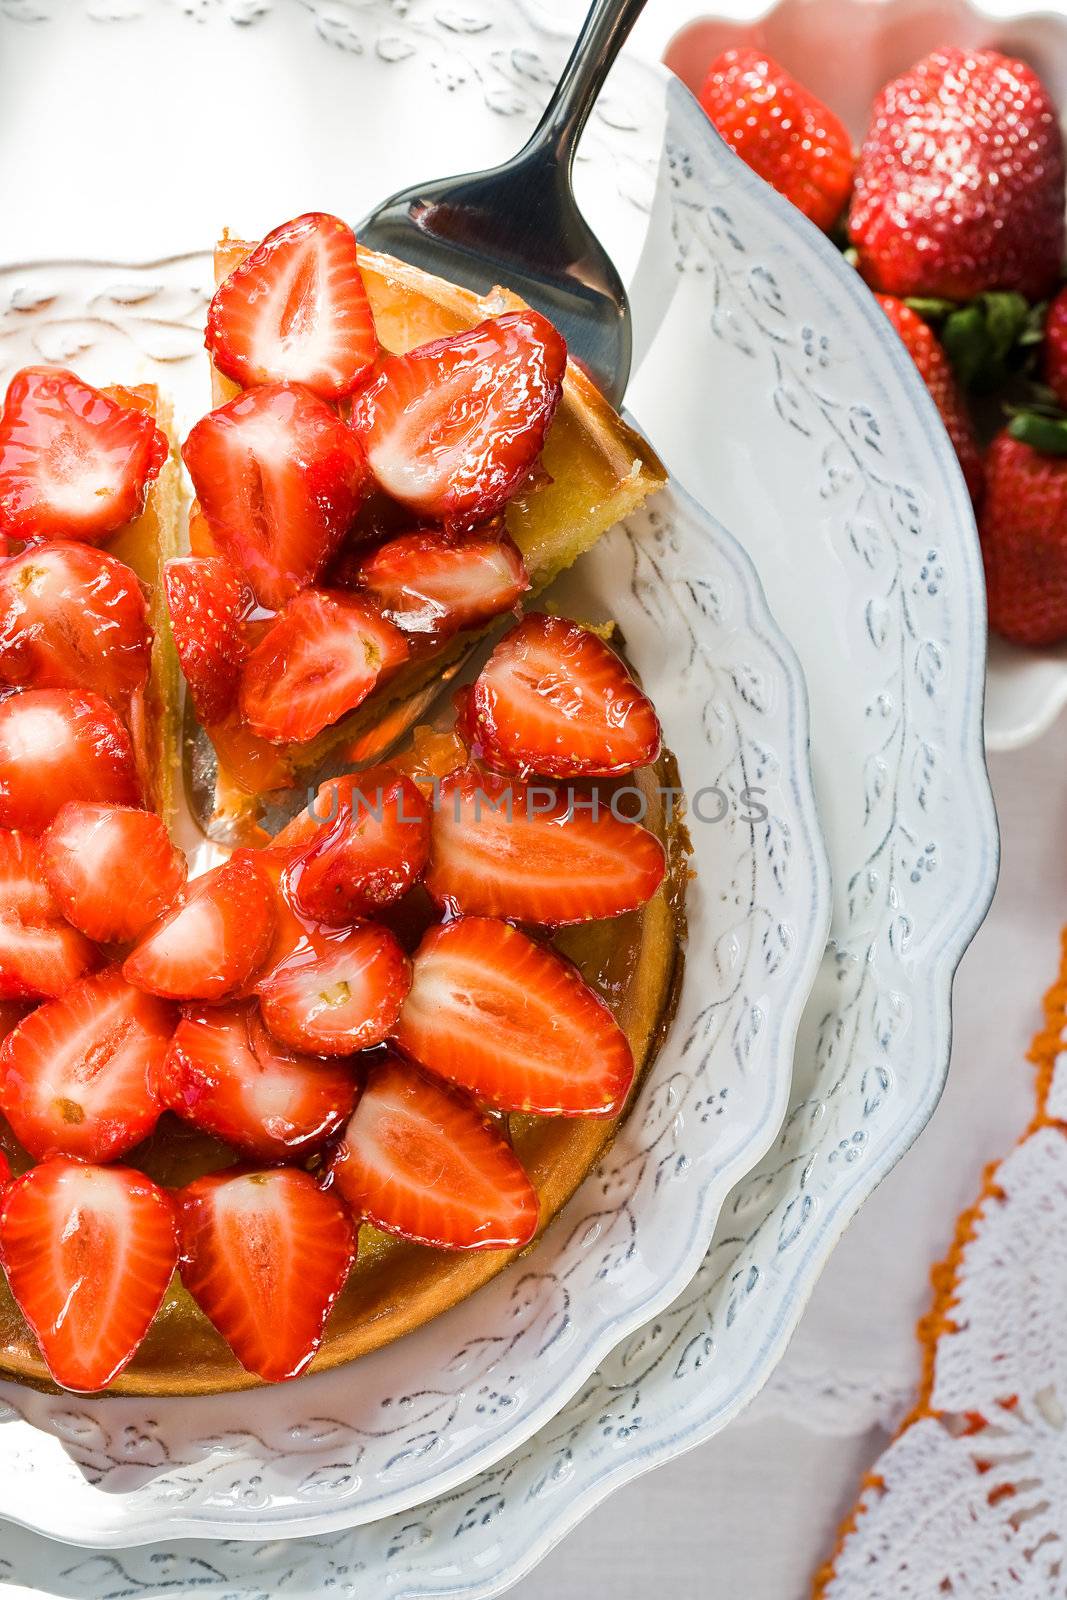 Strawberry cheesecake  by Gravicapa